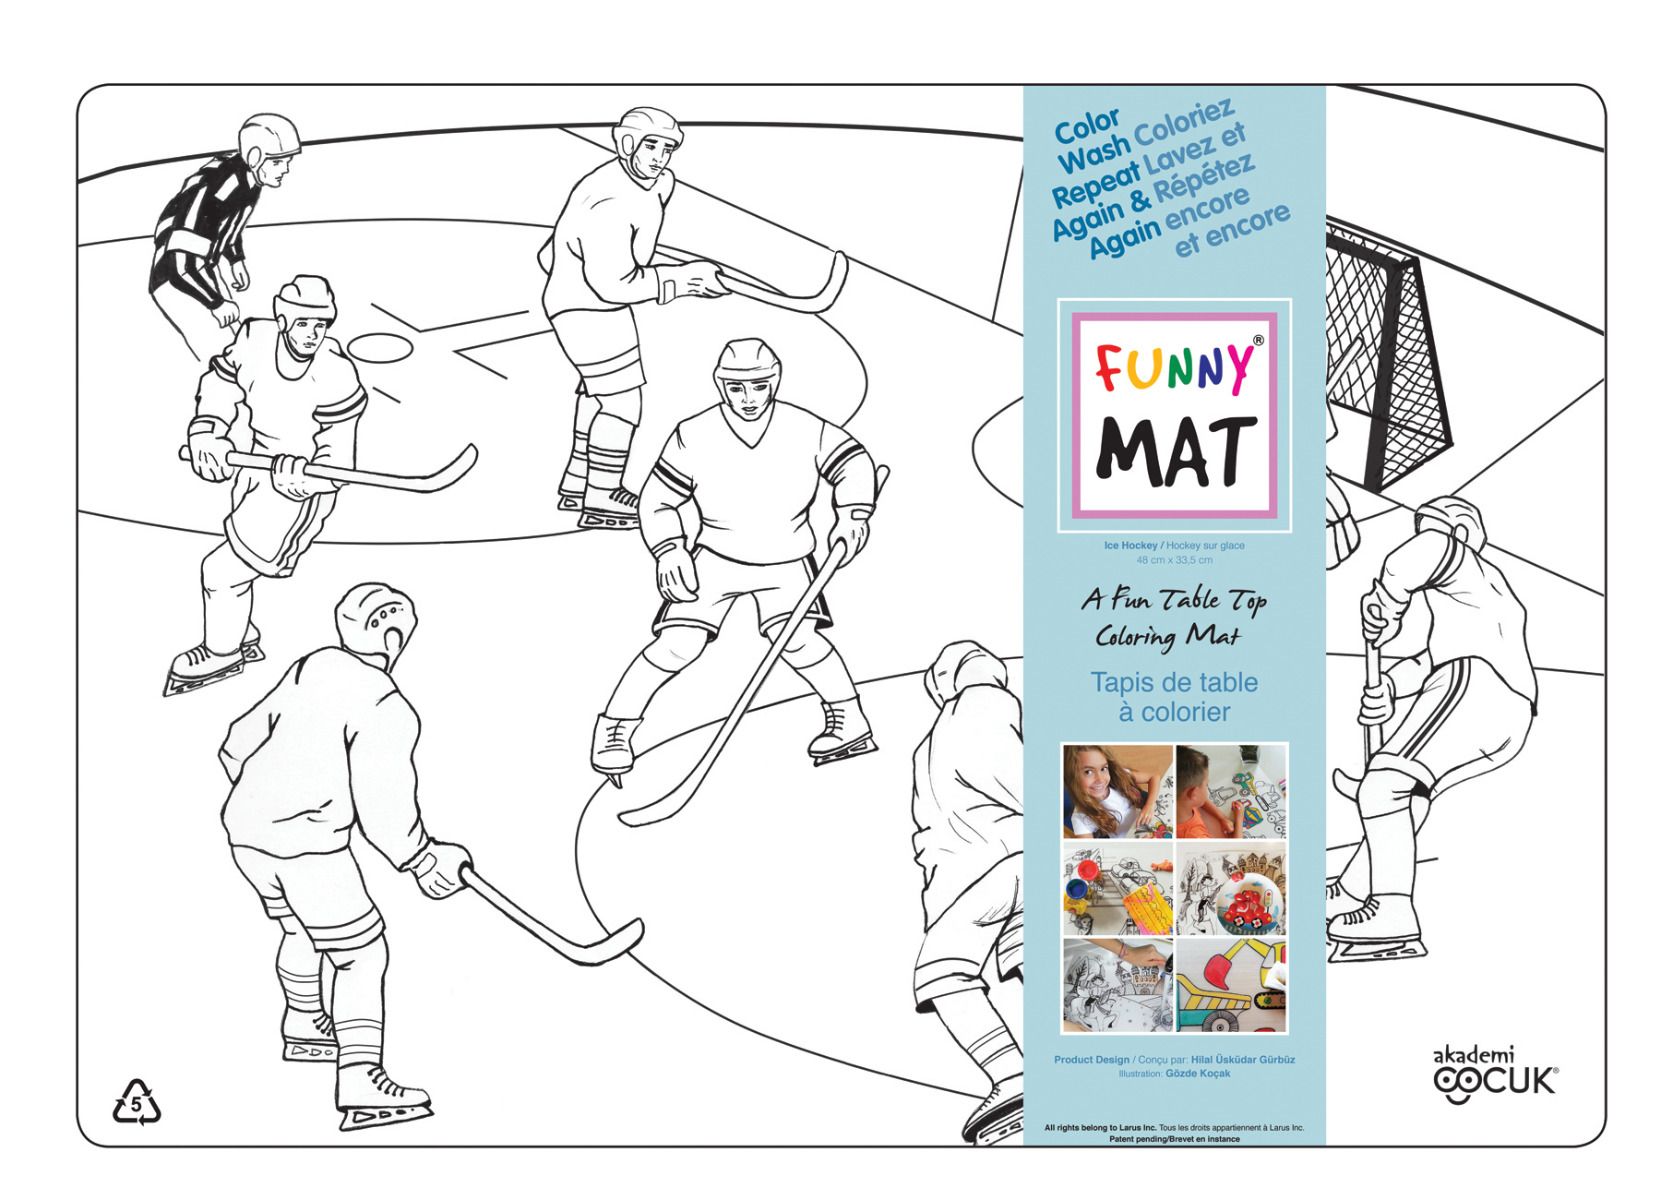 Funny MAT A Fun Table Top Coloring Mat - Hockey (White, Single)